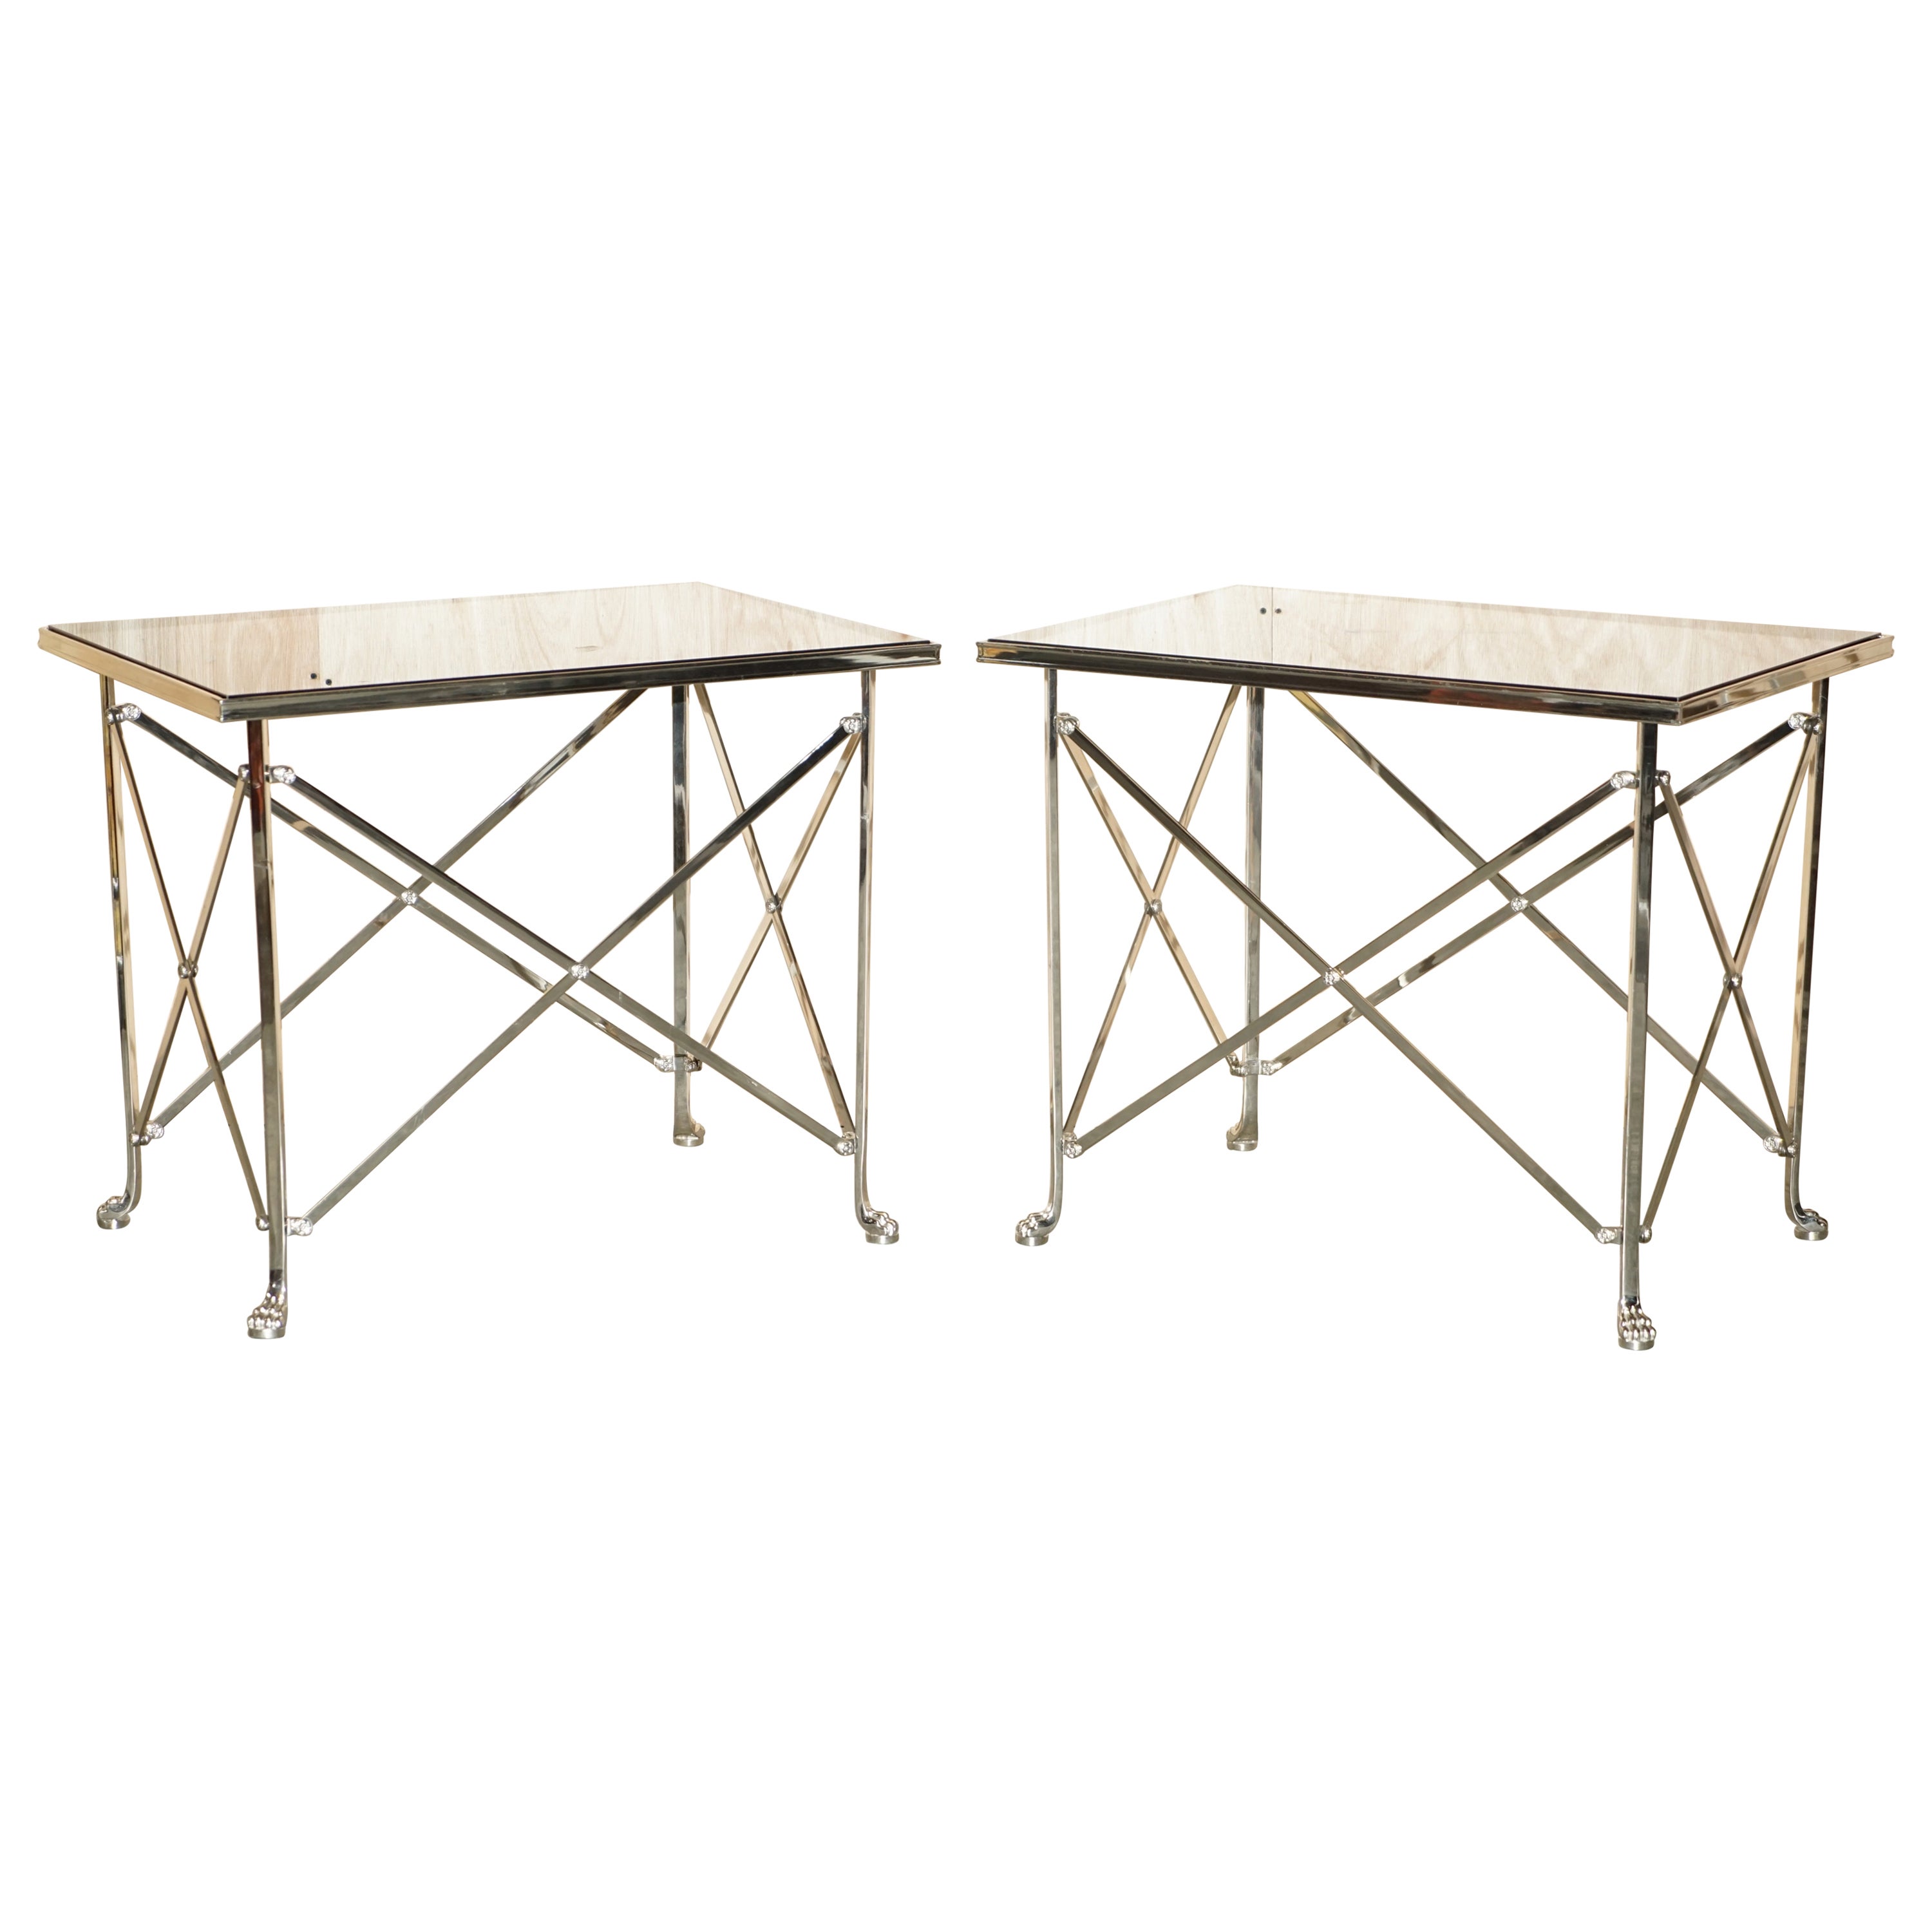 Pair of Ralph Lauren Bel Air Console Tables with Lions Paw Feet & Glass Tops